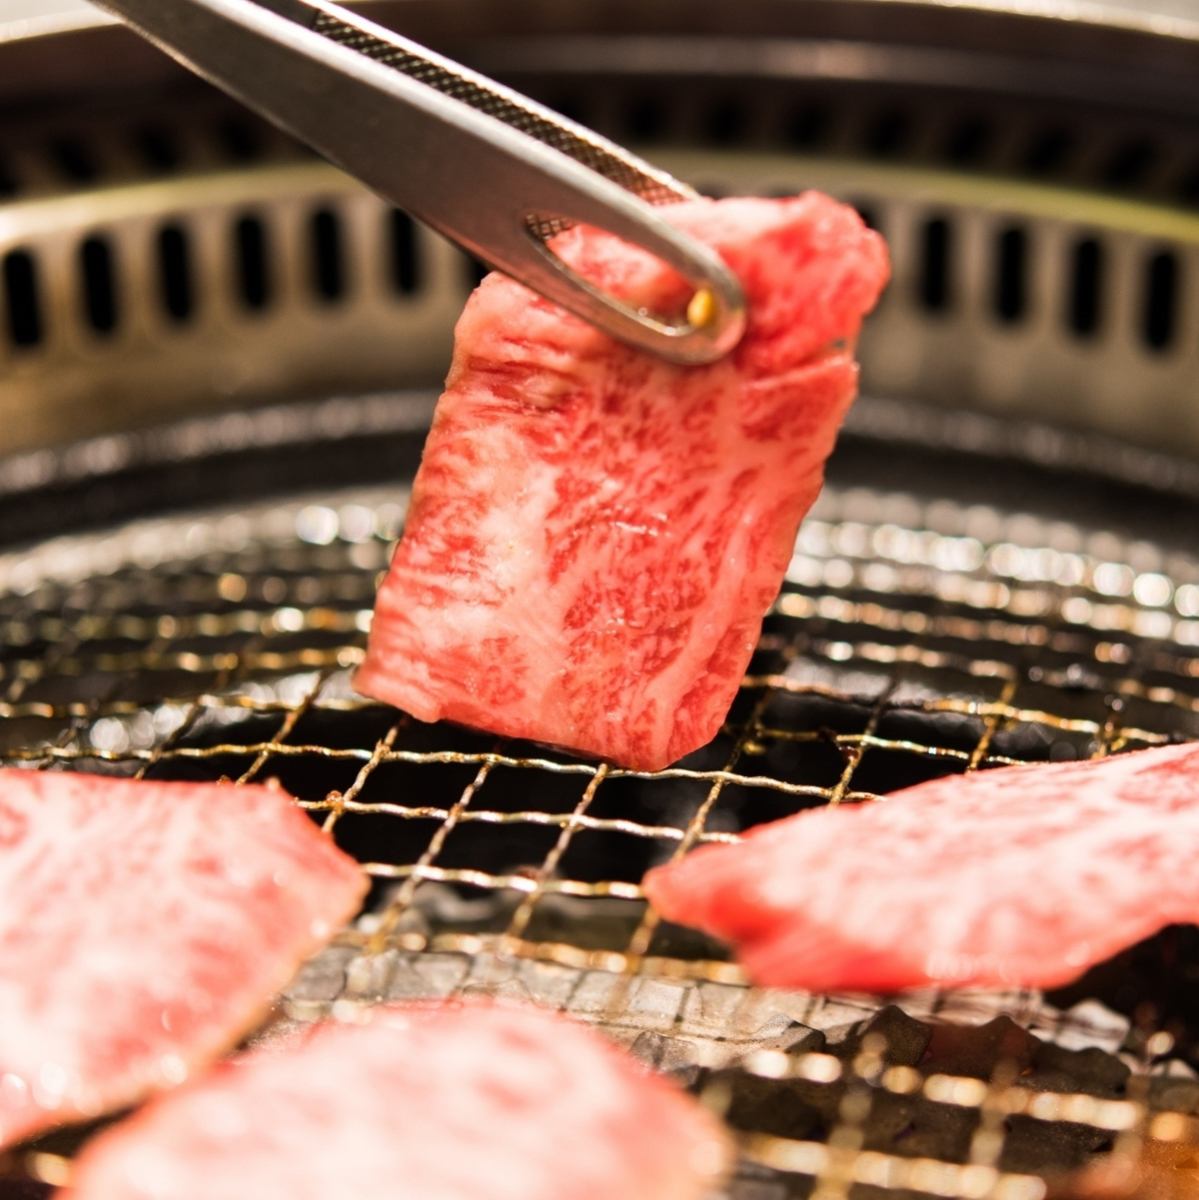 You can enjoy grilled meat ♪ ♪